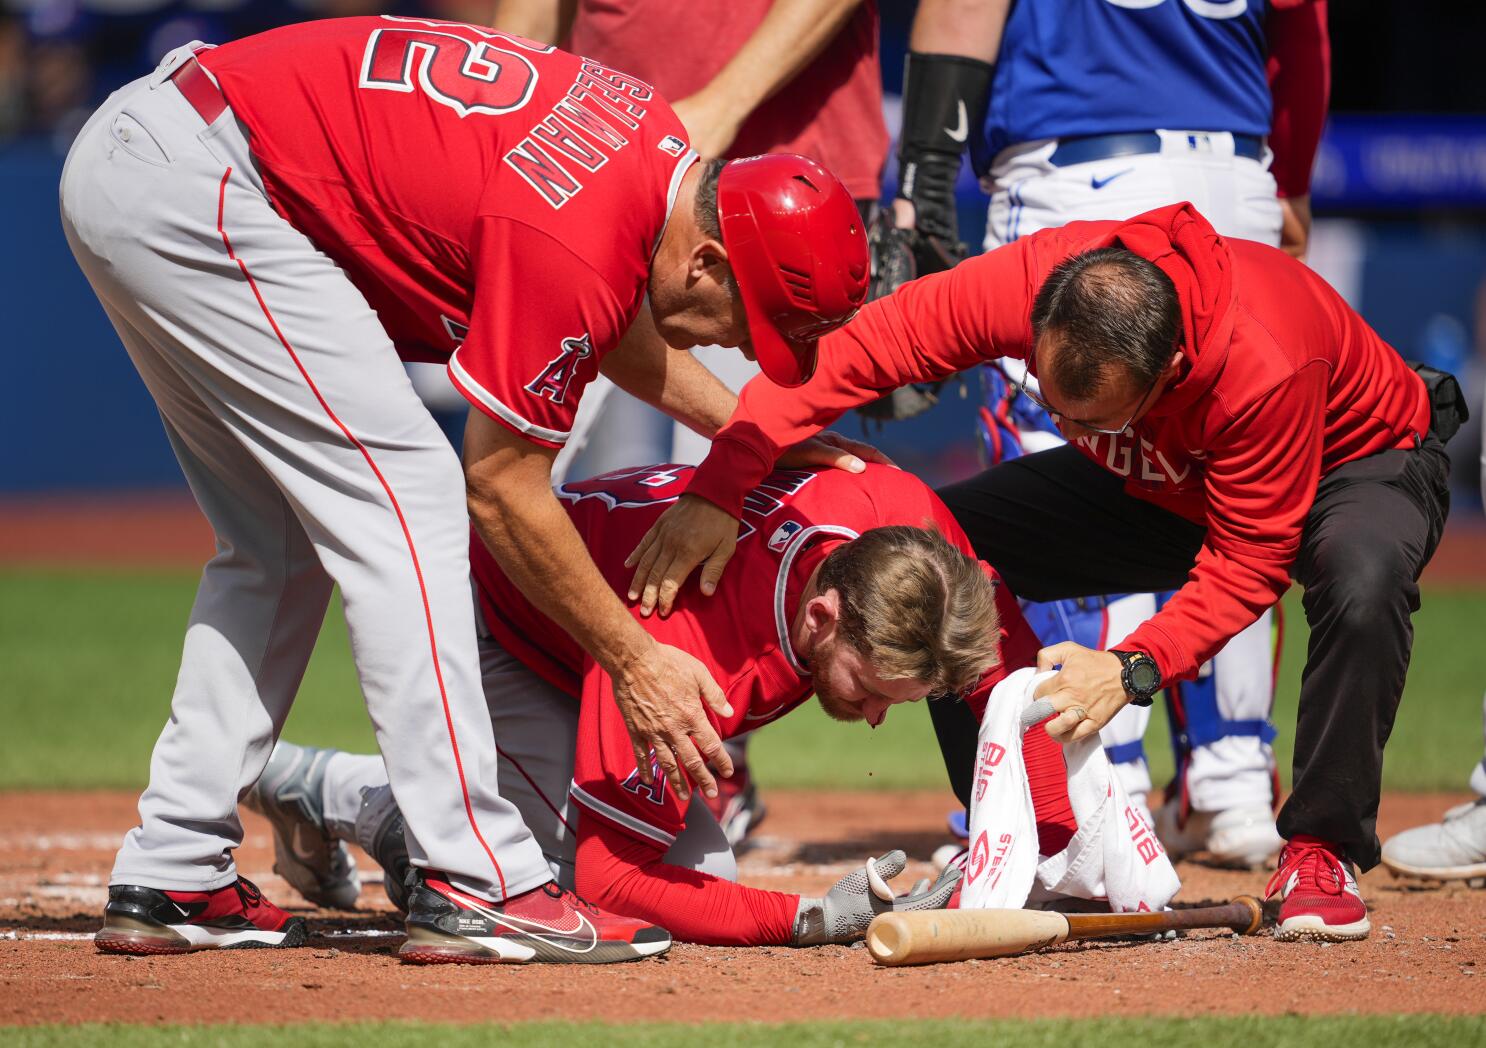 Angels' Taylor Ward bloodied, carted off after taking pitch to face